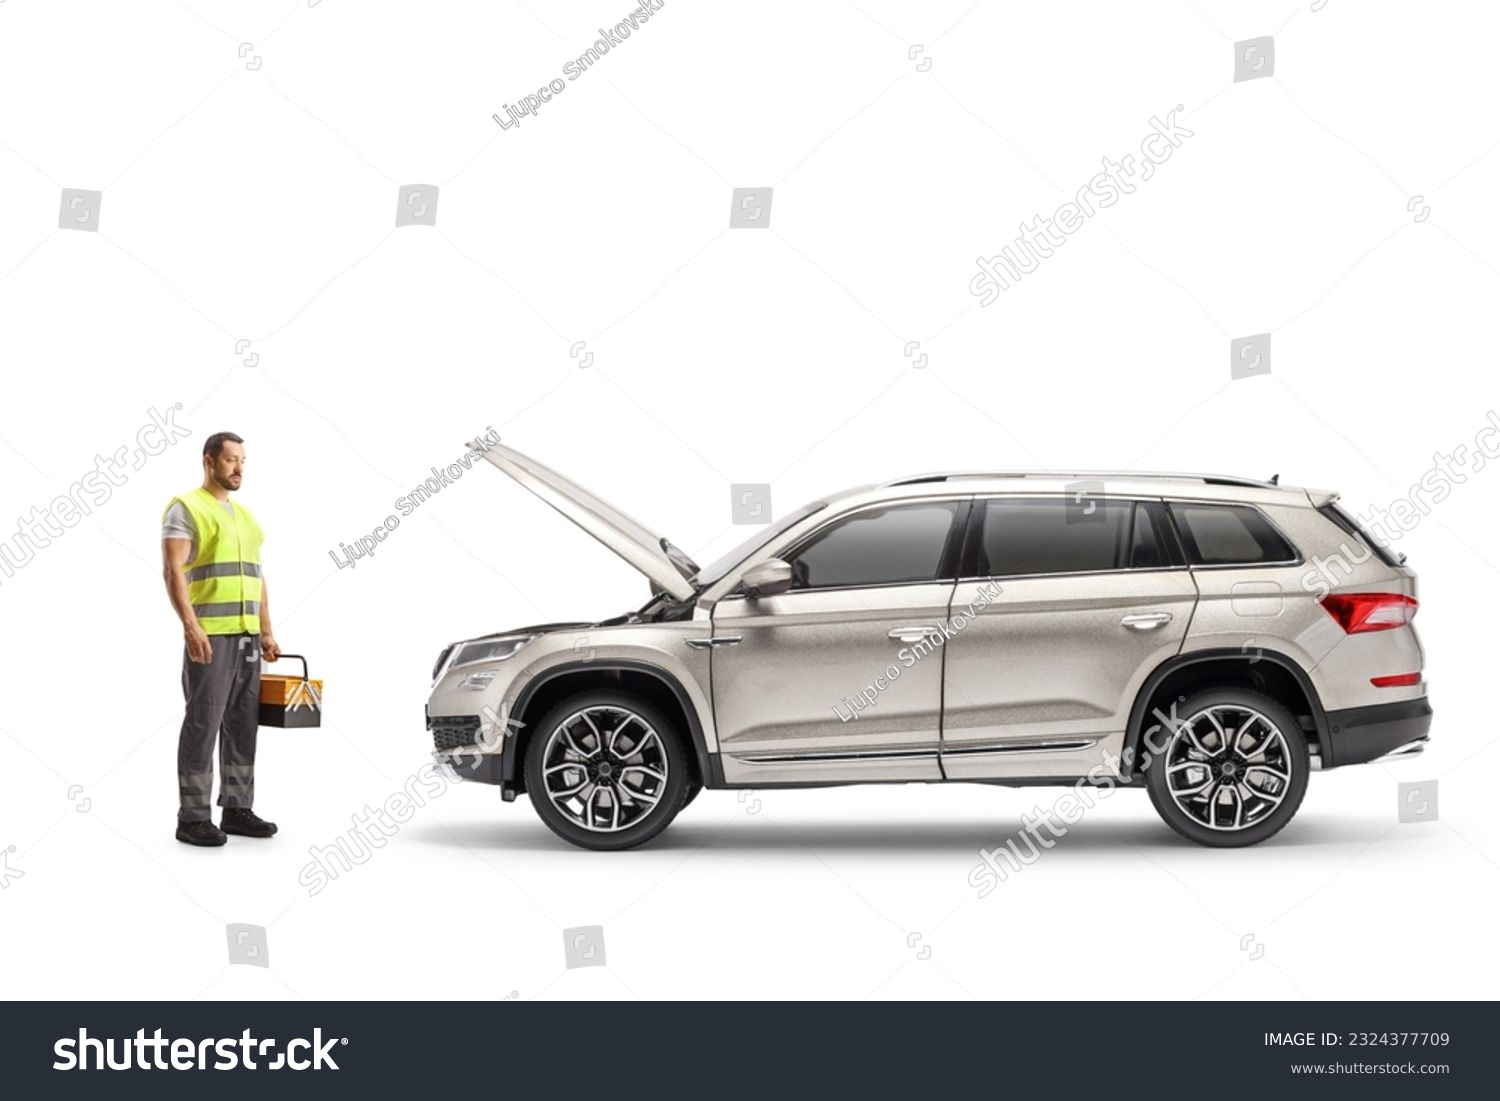 Roadside mechanic holding a tool box and looking at a vehicle with an open hood isolated on white background #2324377709